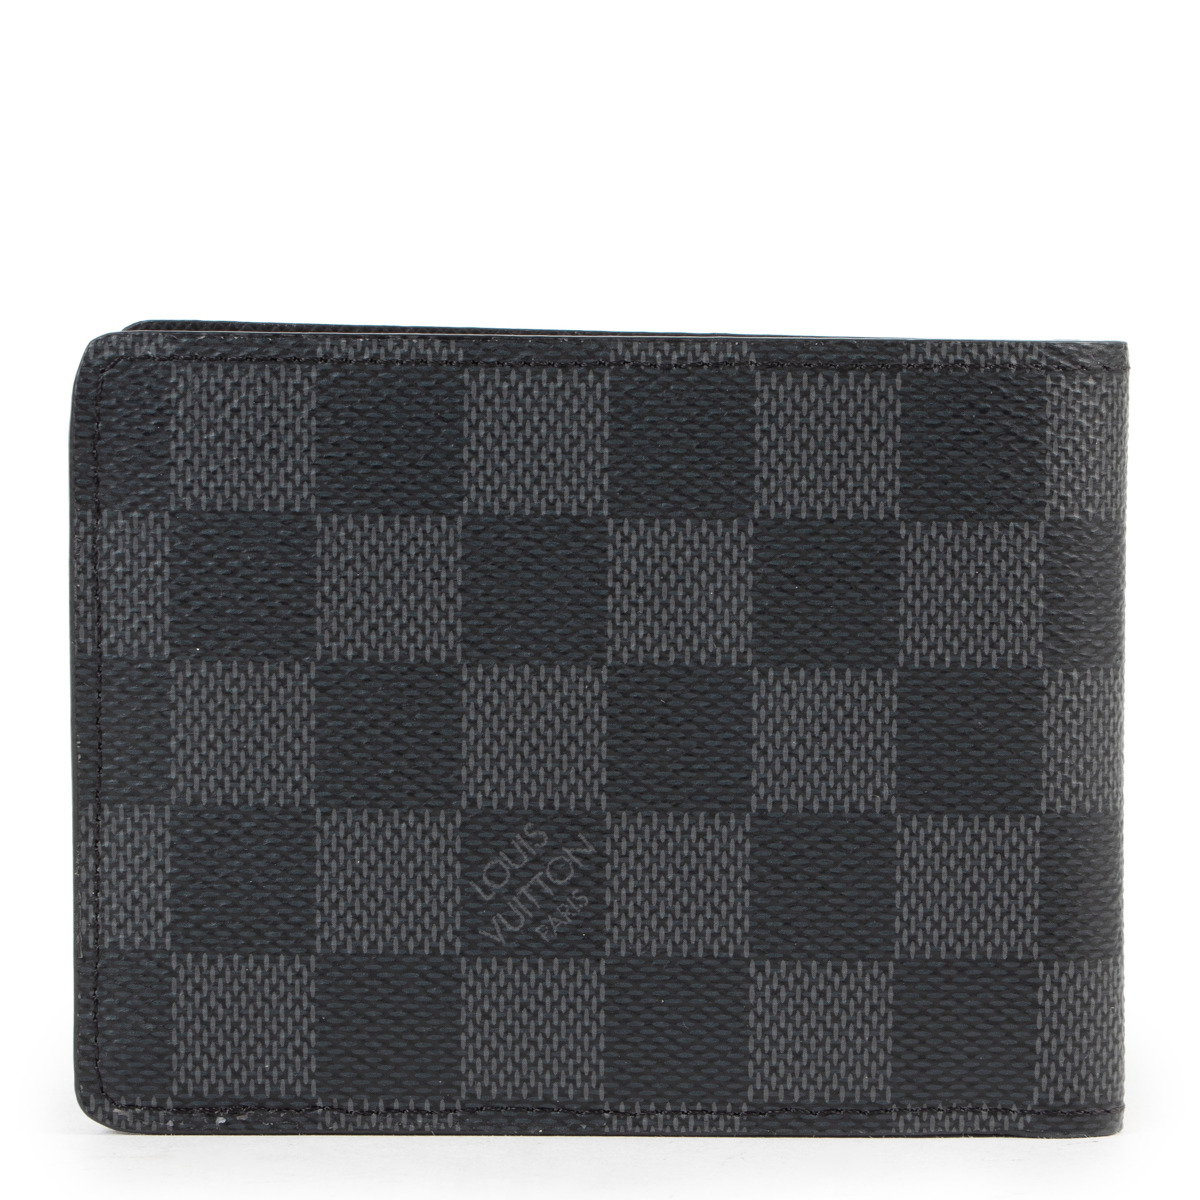 Pre-owned Marco Wallet Damier Graphite Black/grey